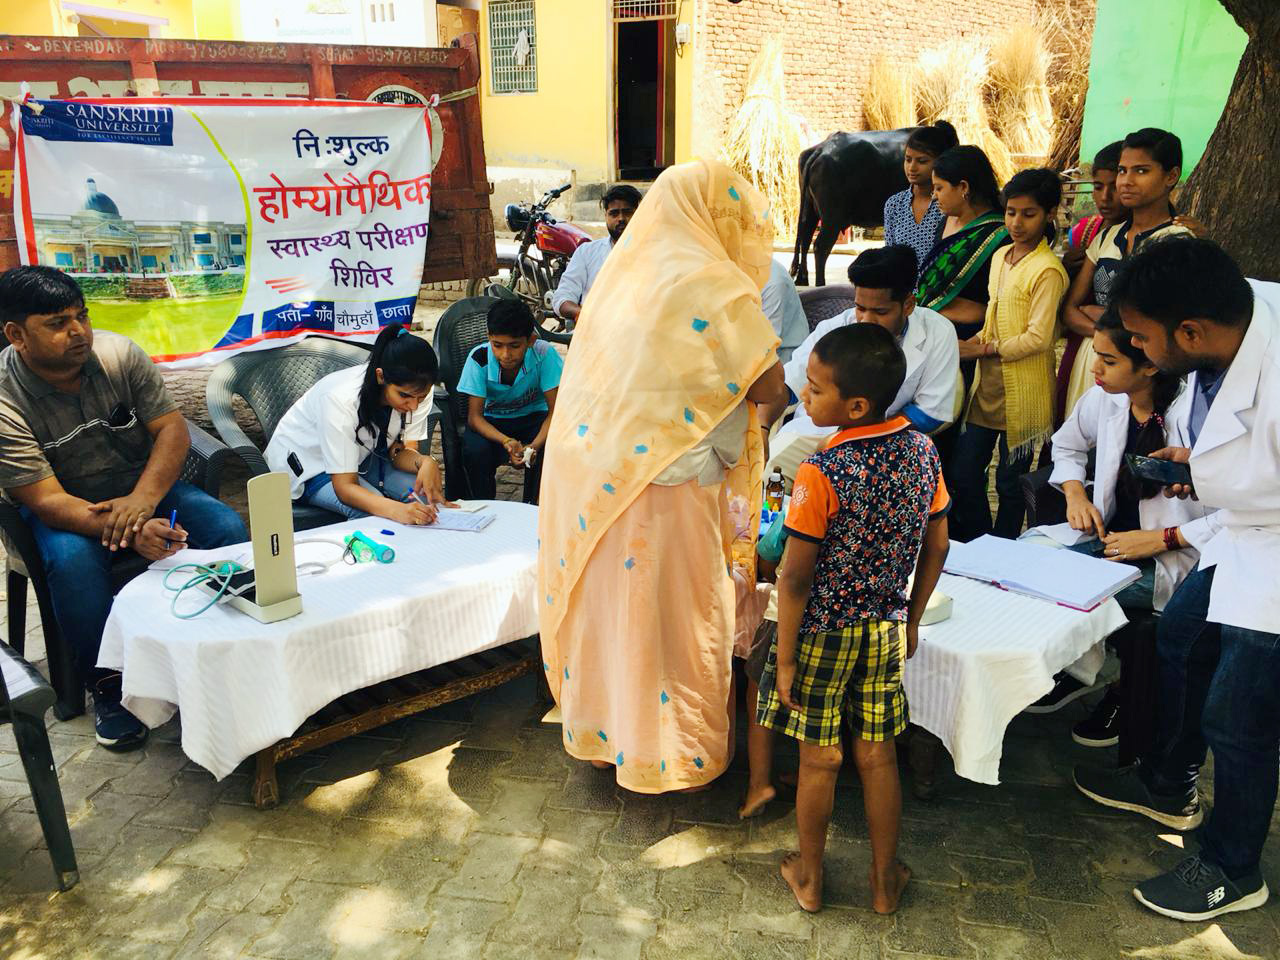 Health and Medical Camp